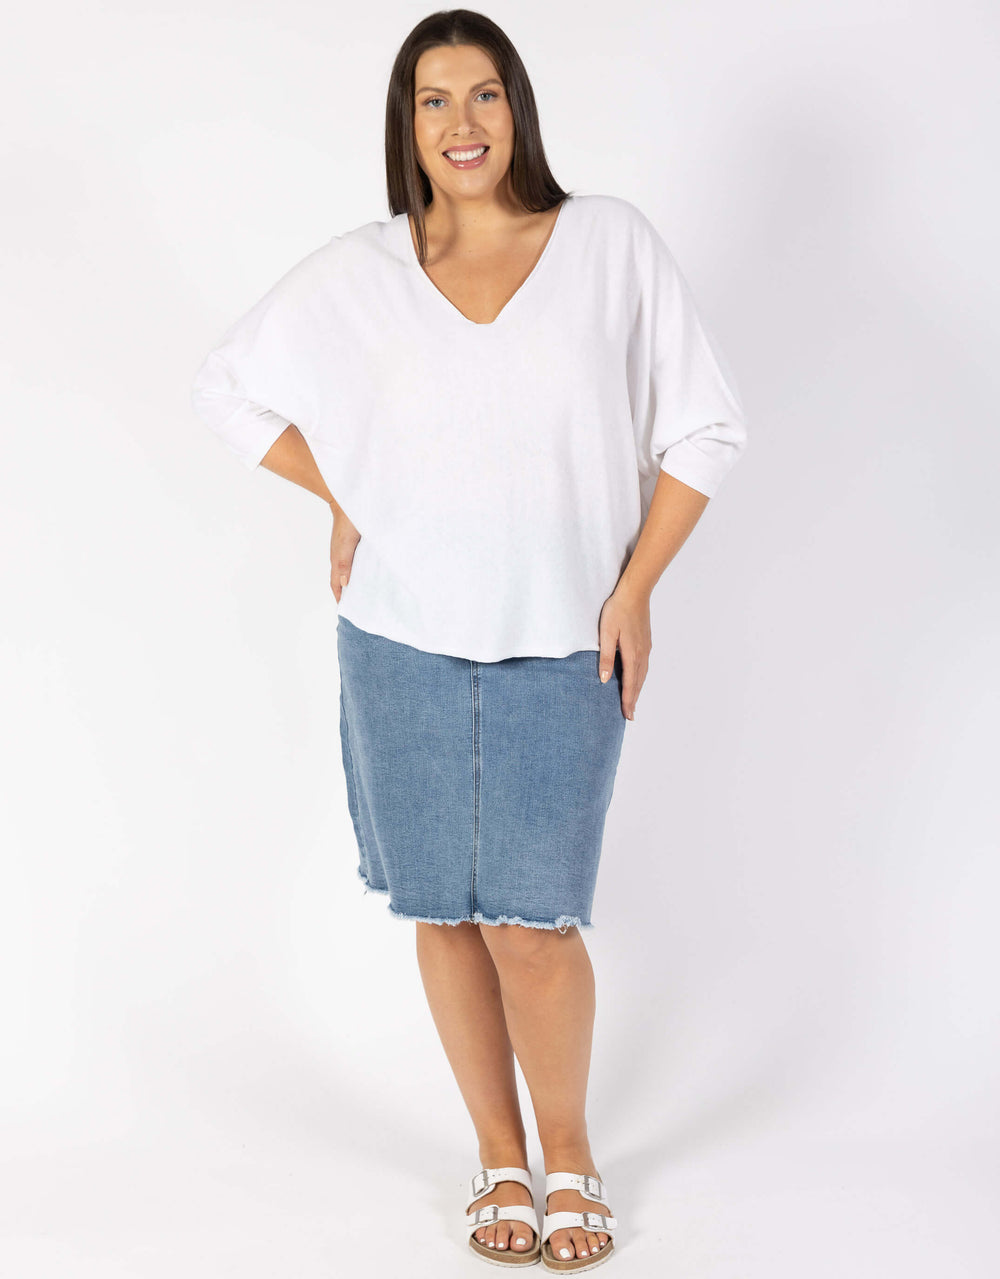 sass-clothing-plus-size-donna-knit-top-plus-size-clothing